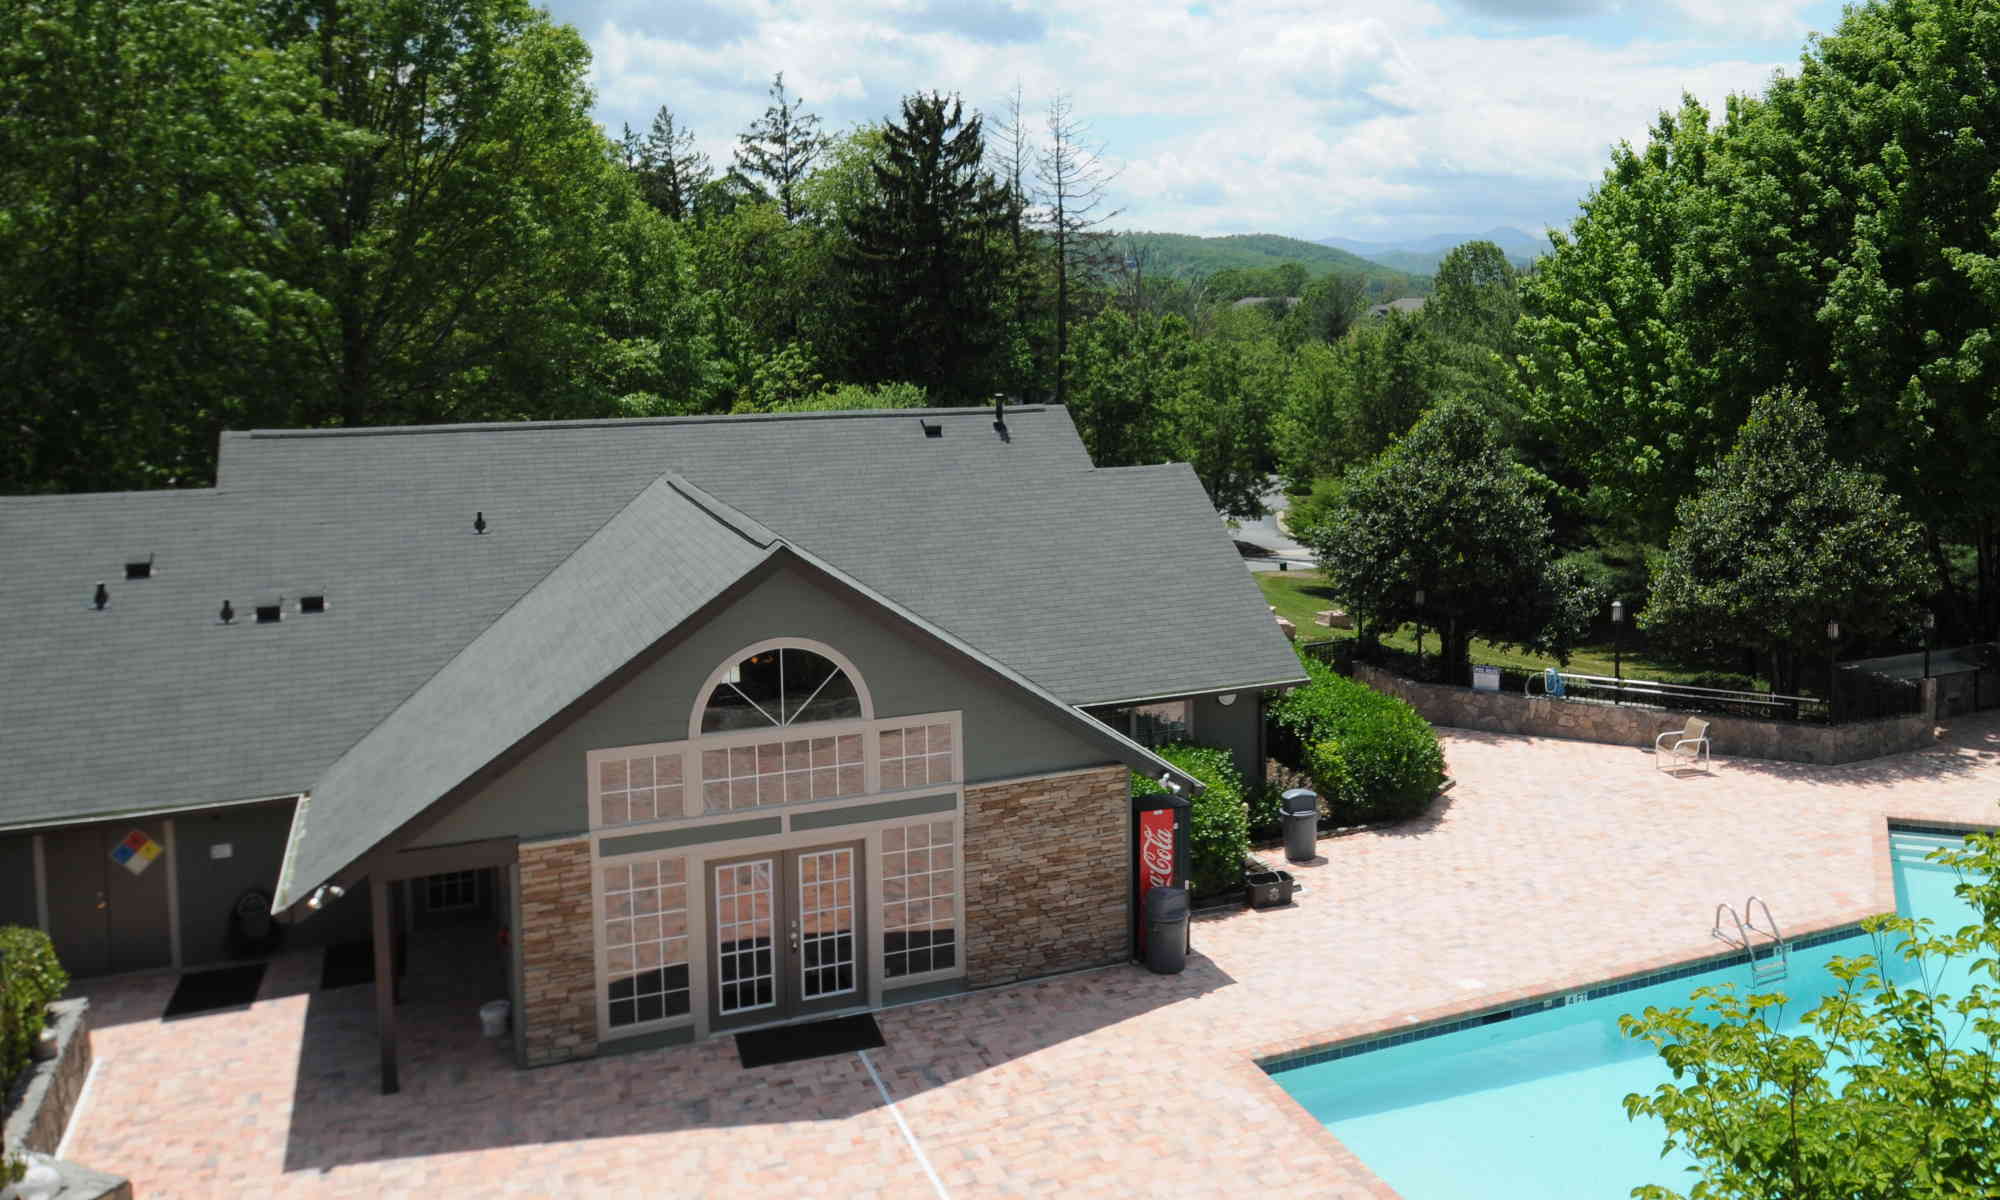 The Views at Asheville. Exterior view of the rear of the leasing office. Pool partially visible in foreground.